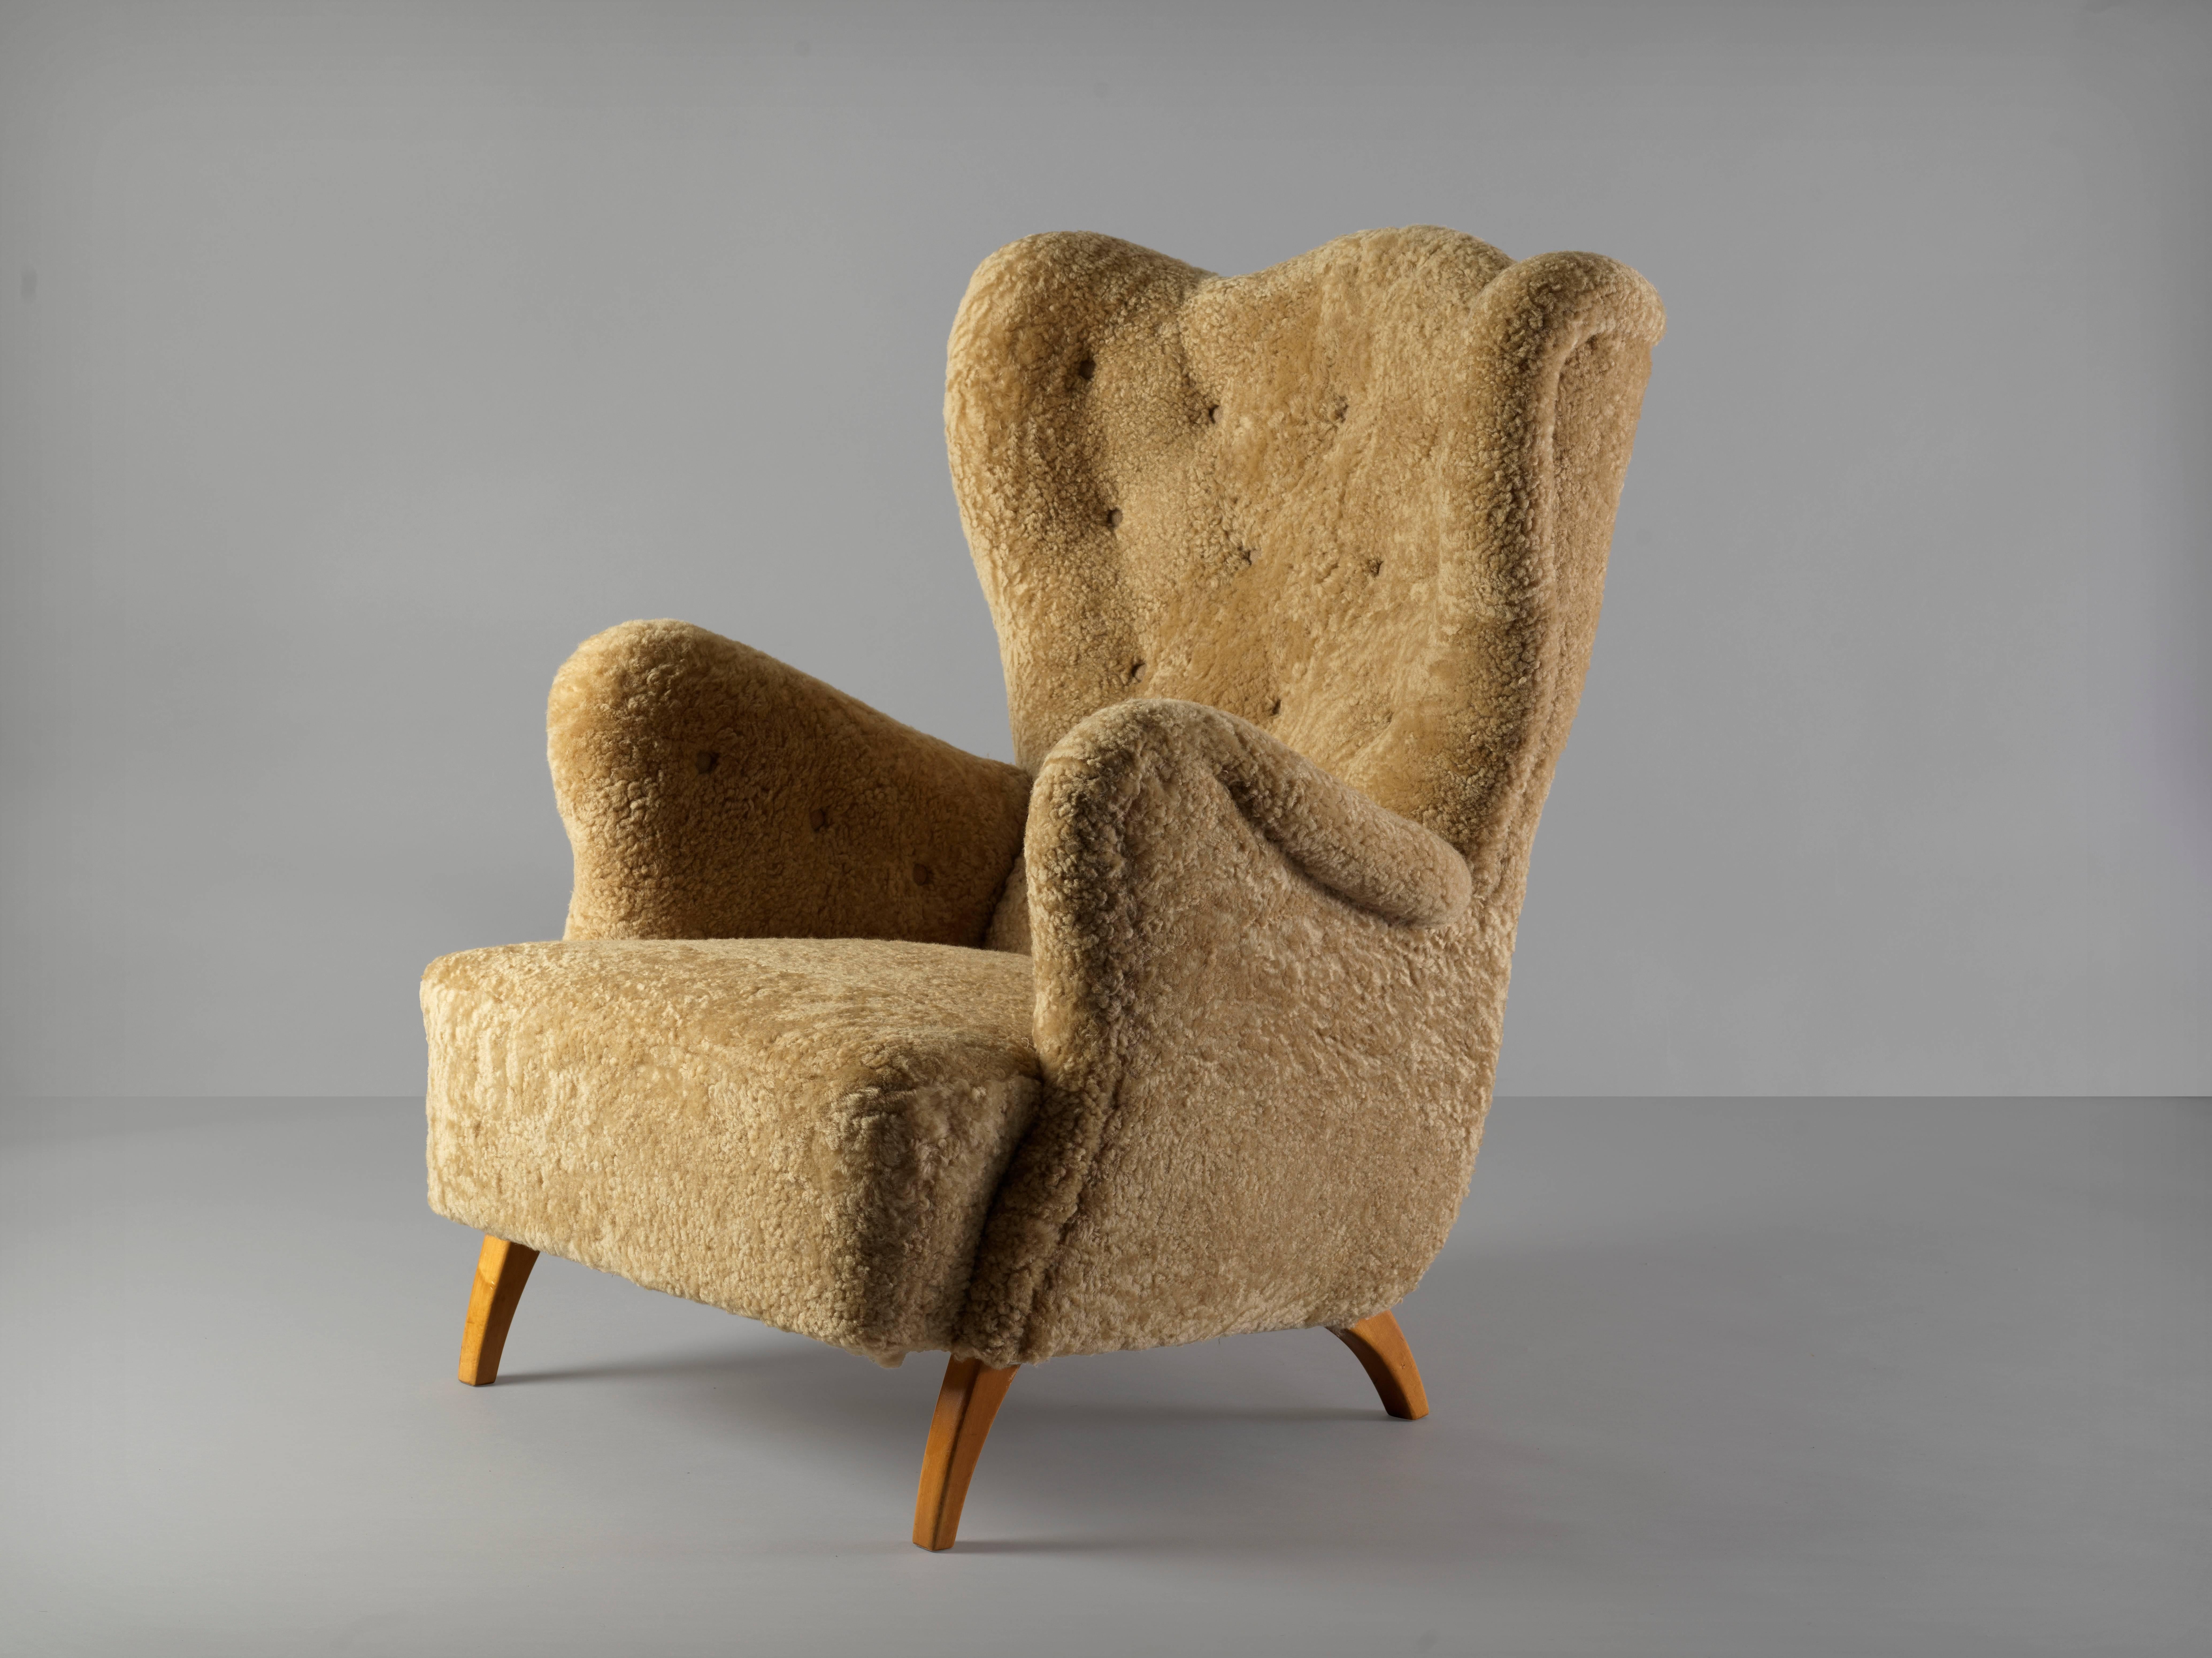 An early modernist lounge chair/armchair. Oak legs, reupholstered in beige lambskin / sheepskin. Produced in the 1940s in Scandinavia. Form in the manner of Peder Moos / Carlo Mollino. 

The chair presents the viewer with a lively organic